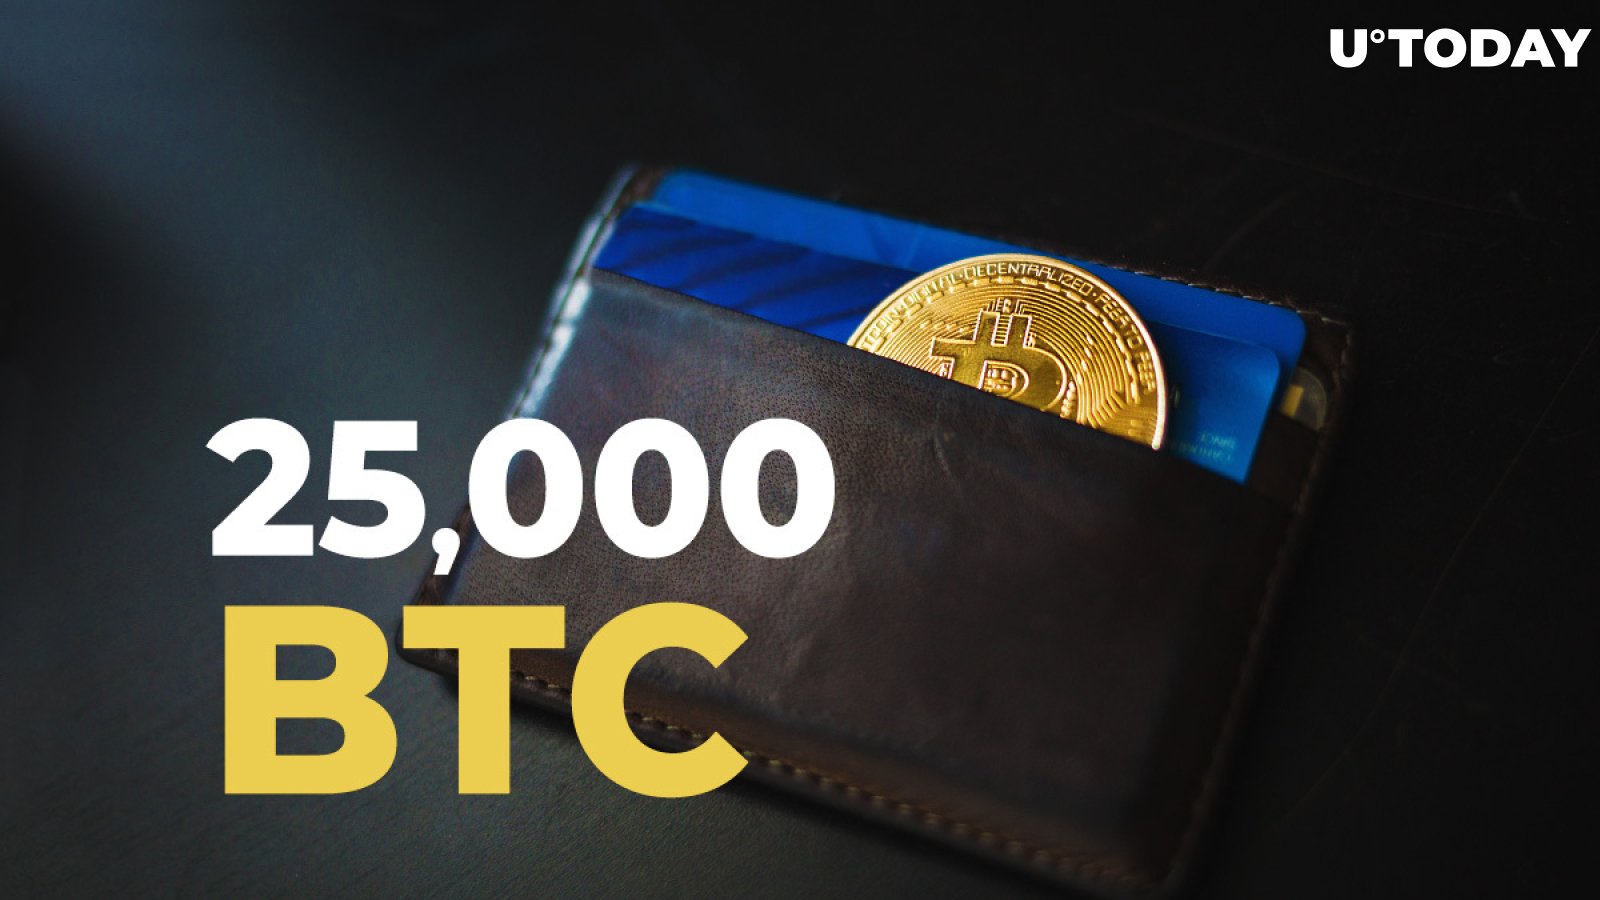 25,000 BTC Transferred for Tiny Fees Banks Cannot Provide